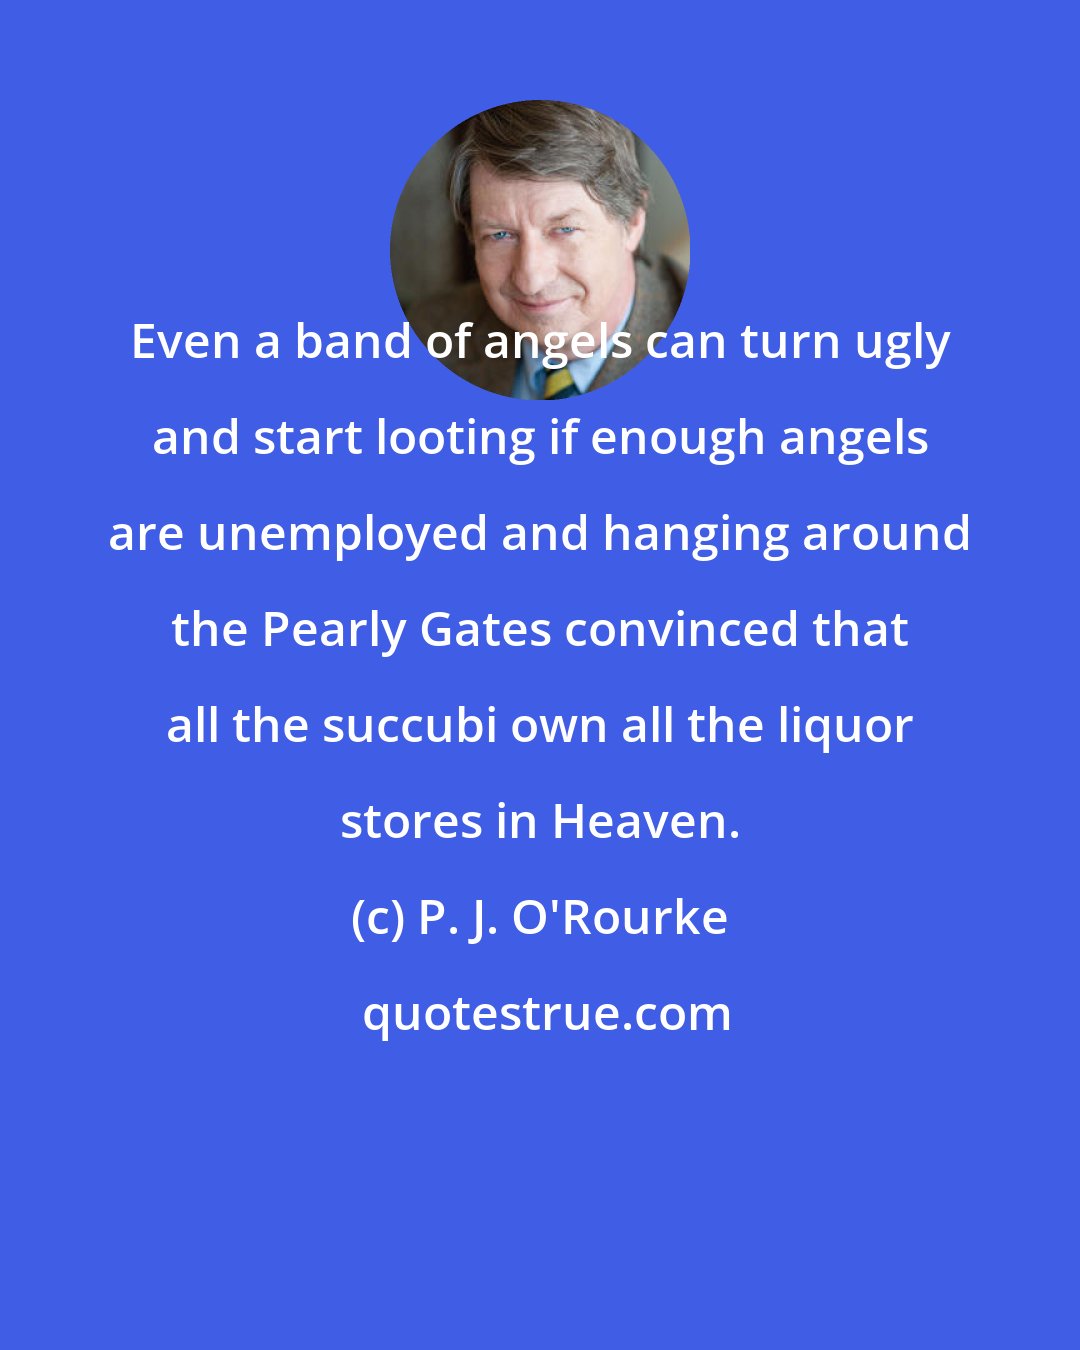 P. J. O'Rourke: Even a band of angels can turn ugly and start looting if enough angels are unemployed and hanging around the Pearly Gates convinced that all the succubi own all the liquor stores in Heaven.